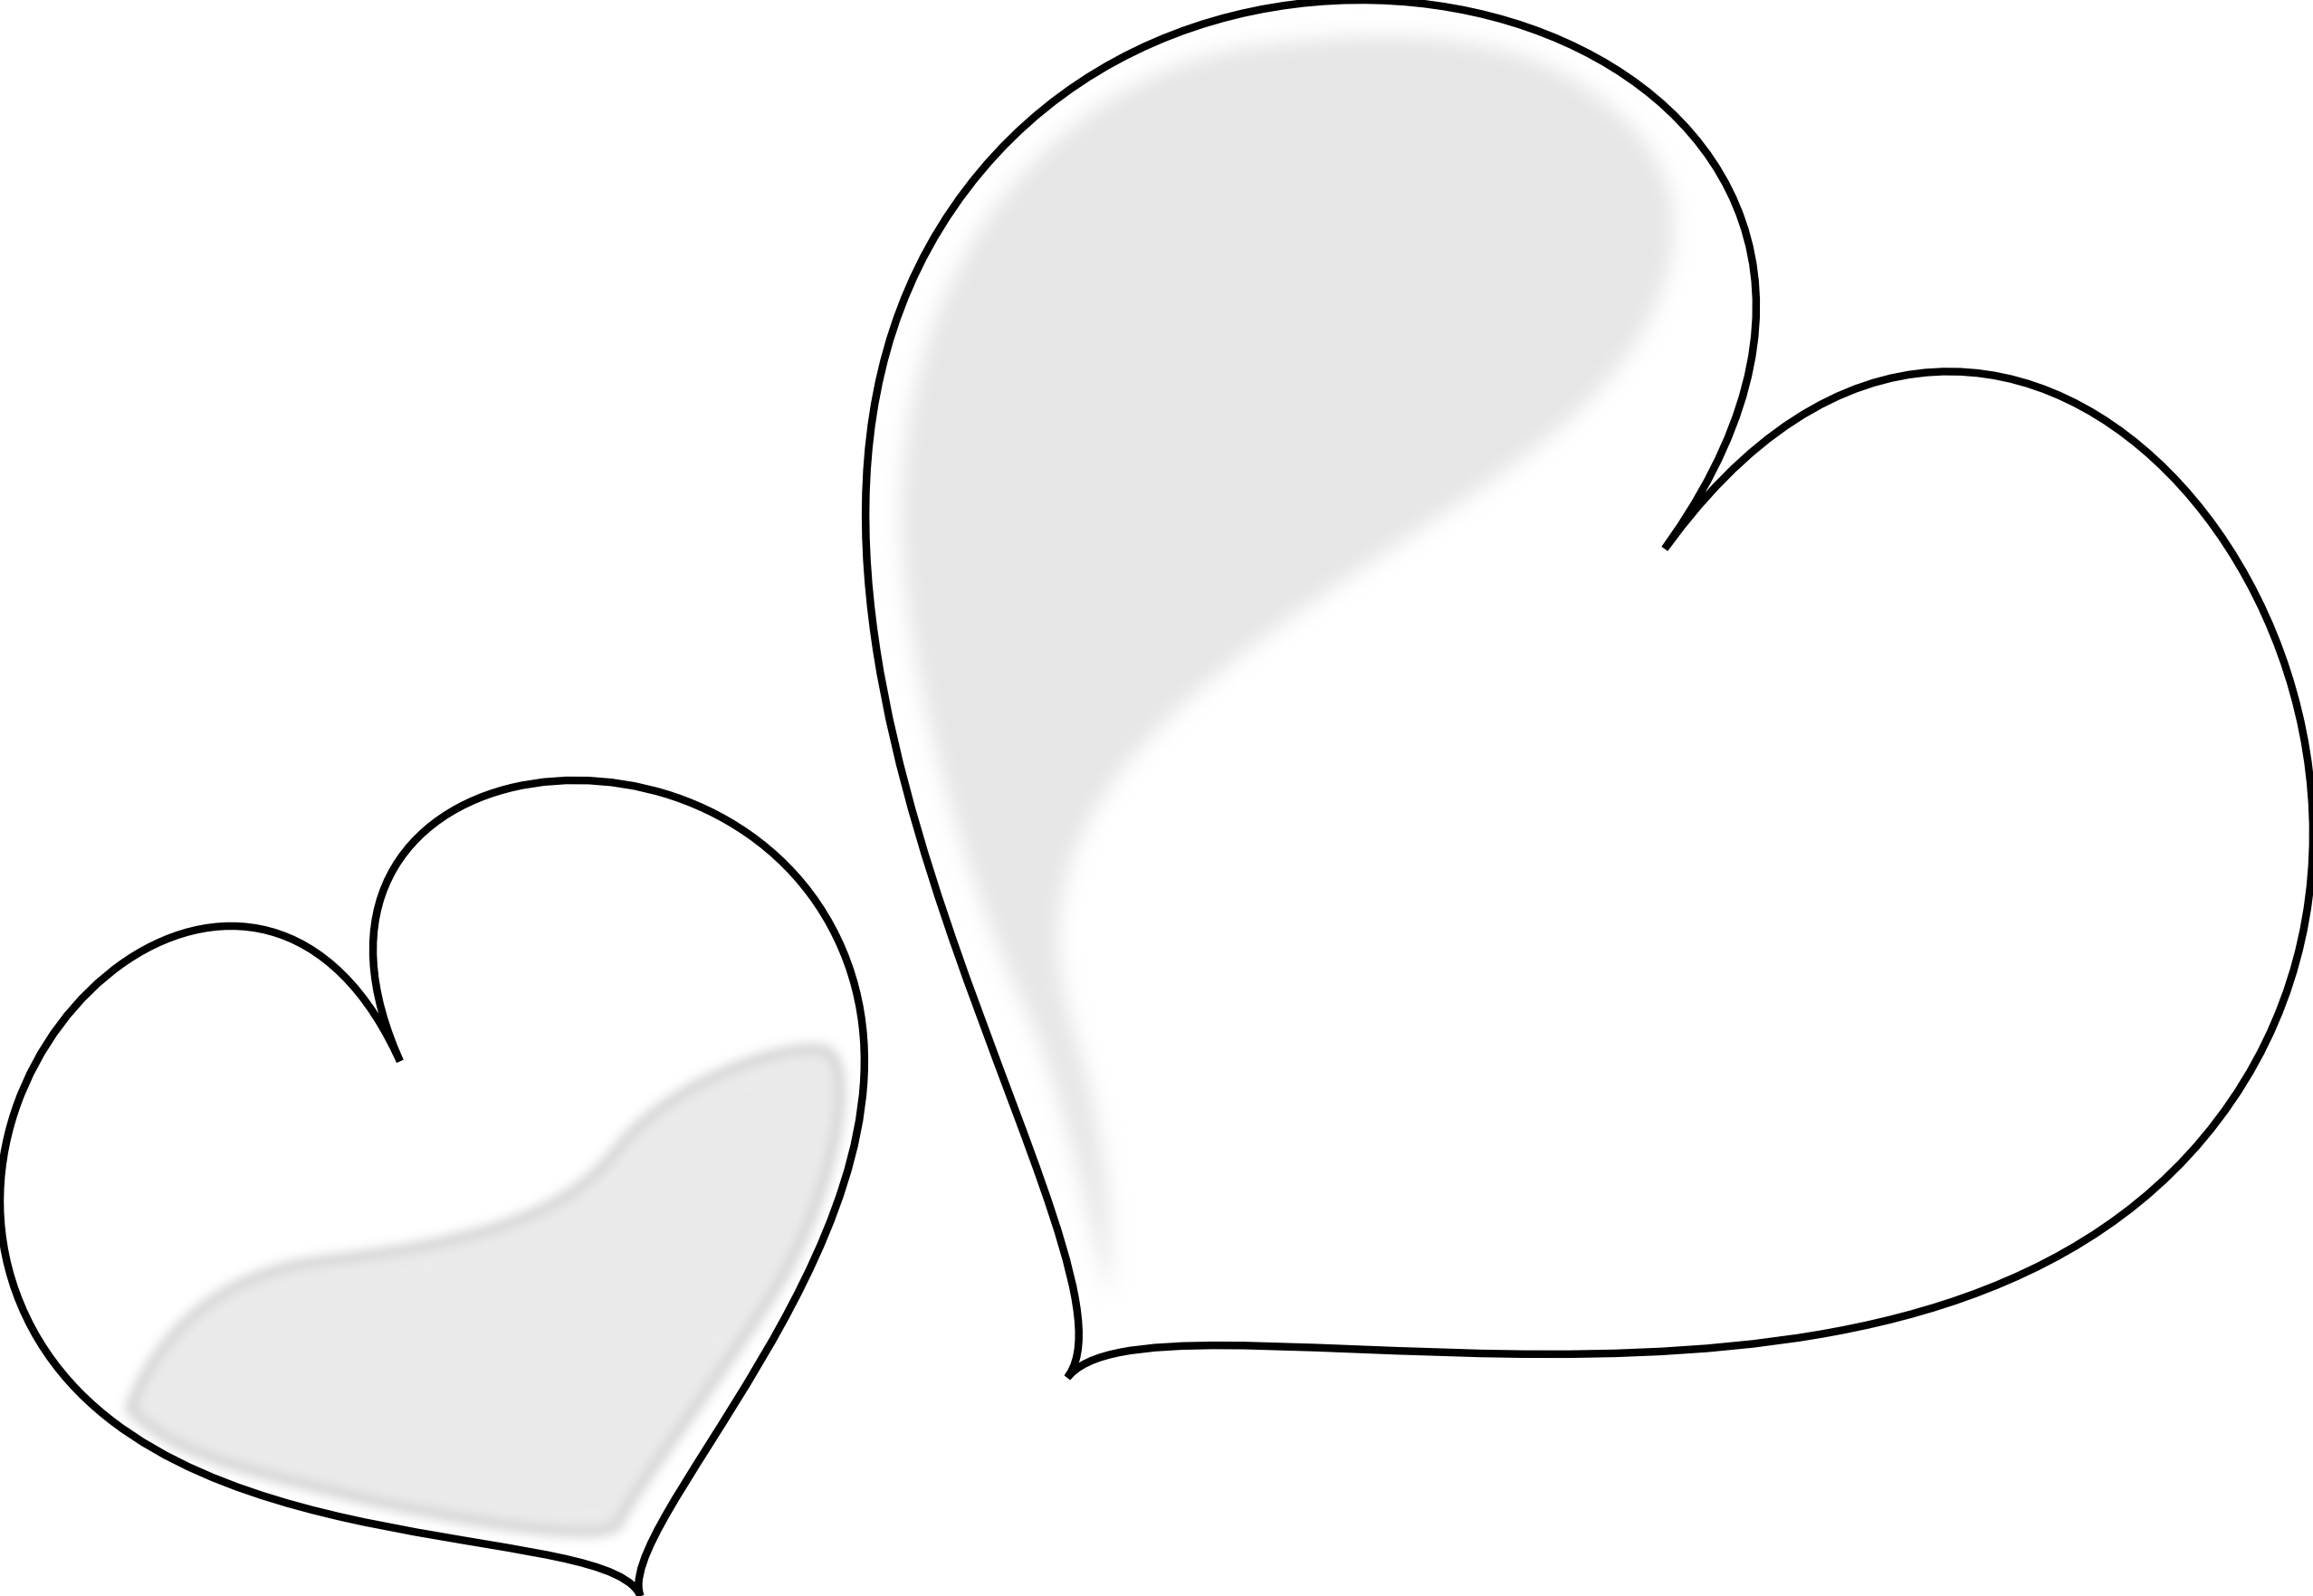 Heart Clipart Black And White - free clipart image - valentine heart clip art, tiny heart clipart, simple heart clipart, red heart clipart, love symbol clipart, little heart clipart, images of hearts clipart, hearts free clip art, heart design clipart, heart clipart red, heart clipart images, heart banner clipart, heart attack clip art, heart arrow clipart, happy valentines clip art, football heart clipart, clip art my heart is on the field, clip art hearts, broken family clipart, basketball heart clipart